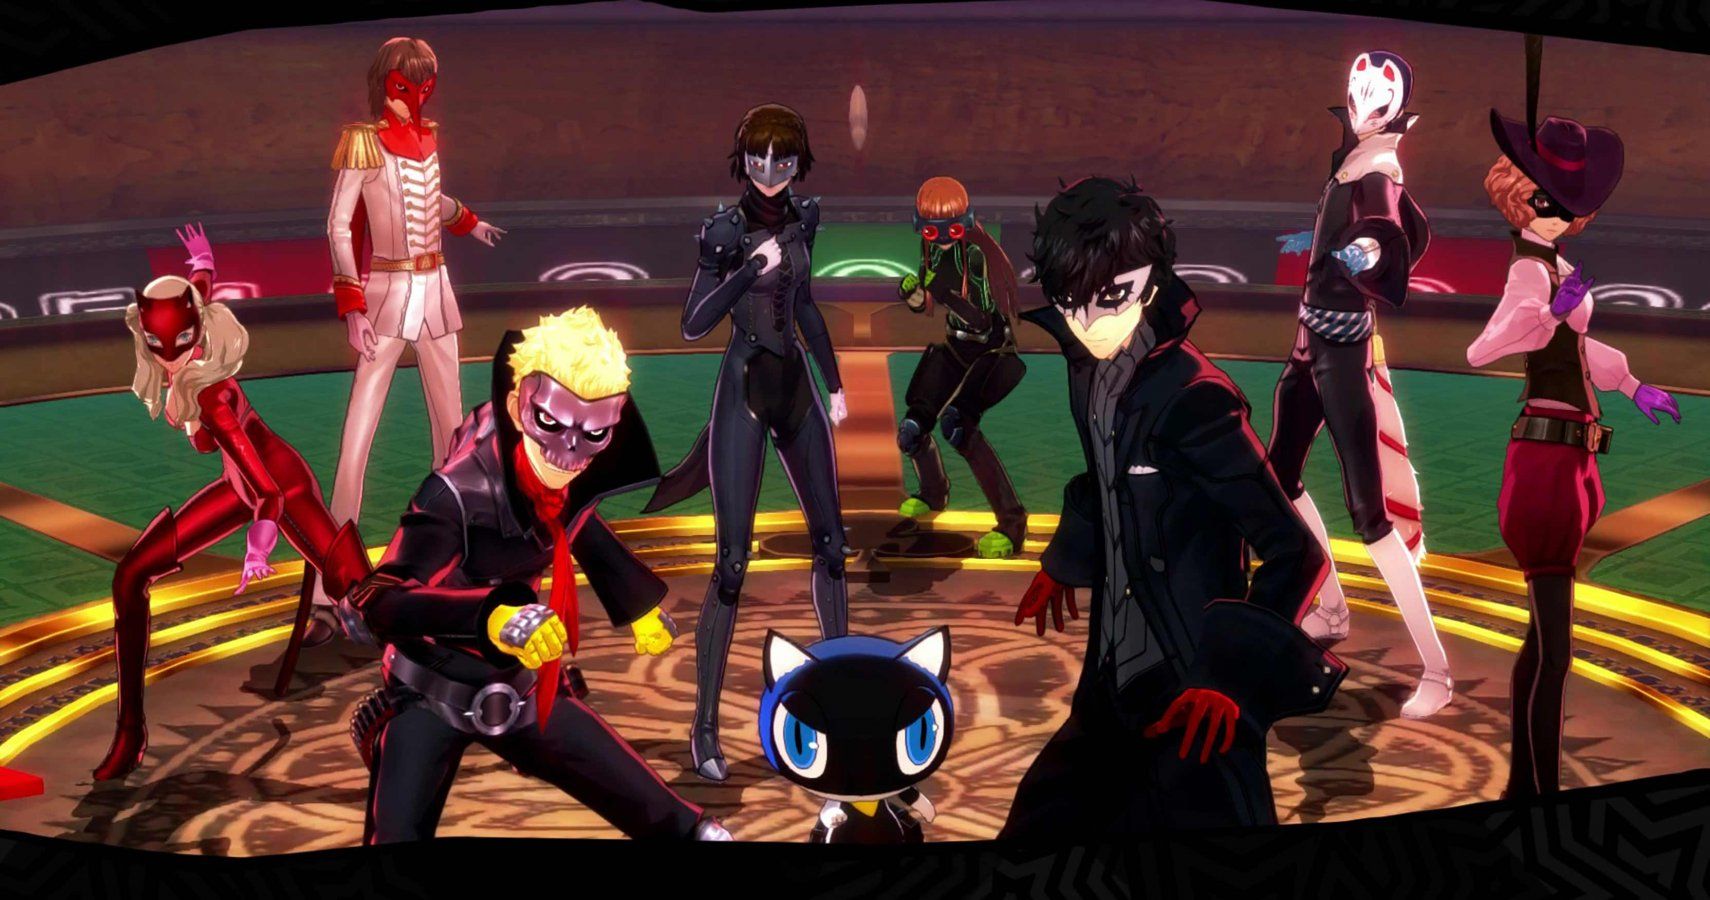 How i feel about the Persona 5 characters